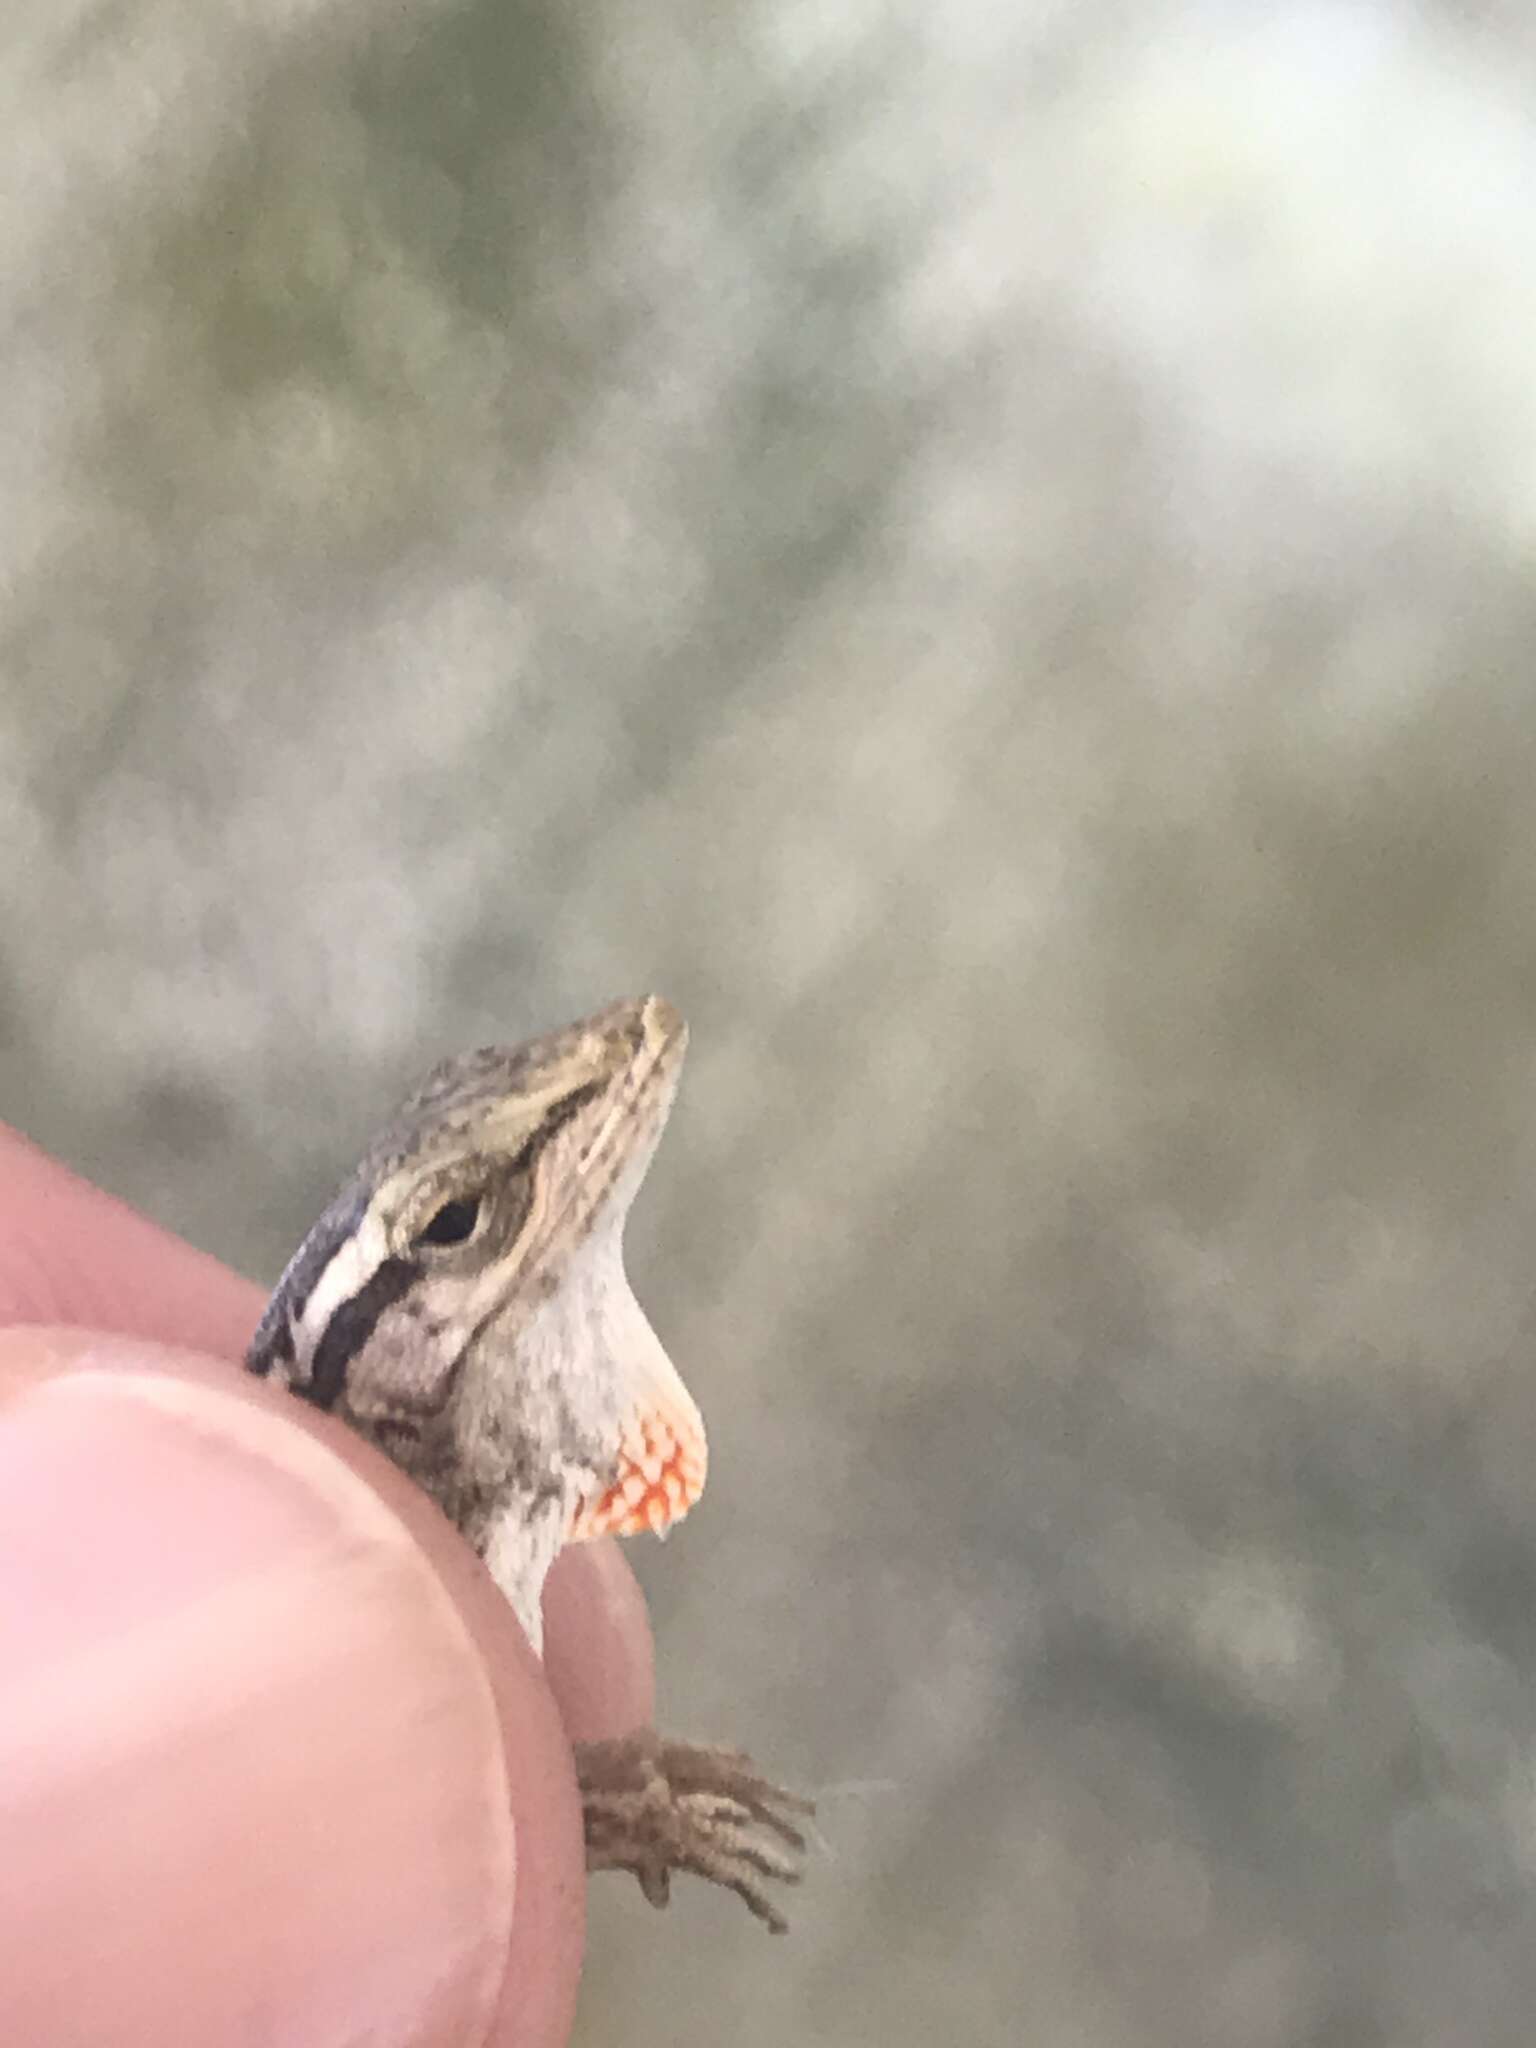 Image of Five-striped grass anole